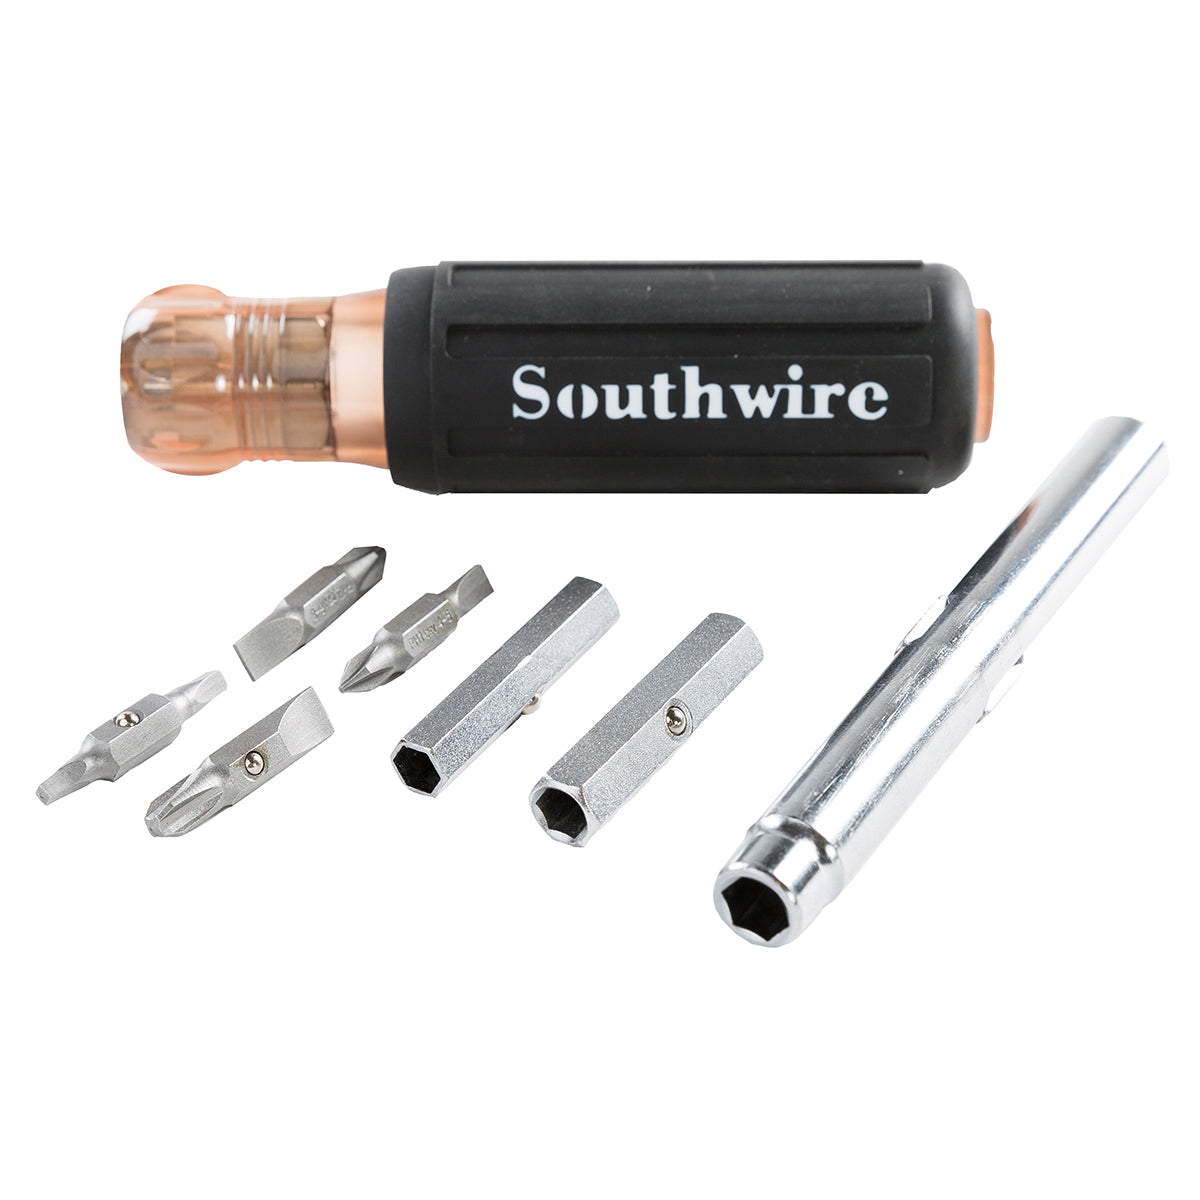 Southwire SD12N1 12-in-1 Multi-Tool Screwdriver